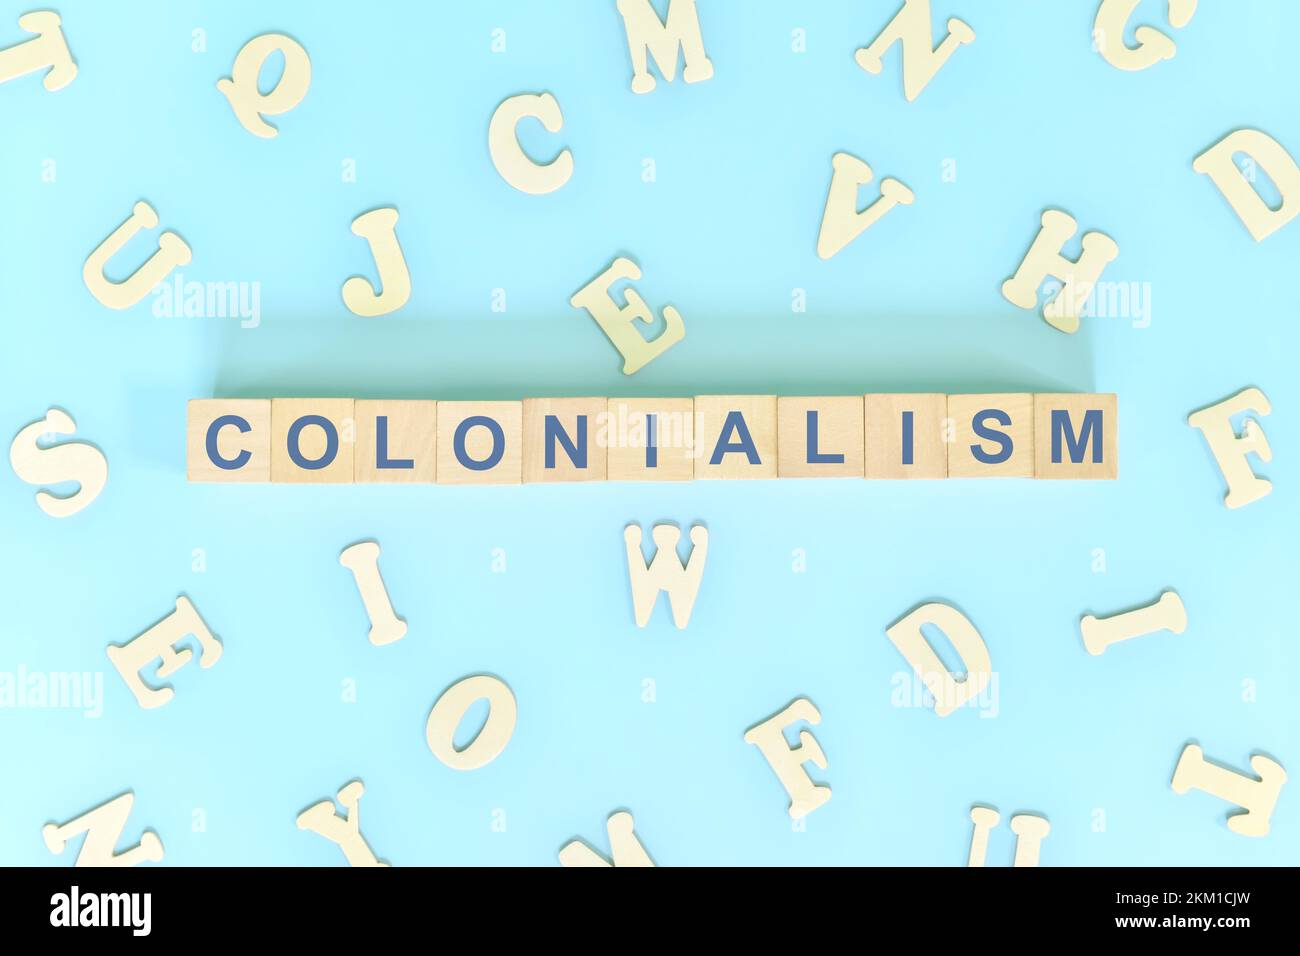 Colonialism government, politics and history concept. Wooden blocks typography flat lay in blue background. Stock Photo